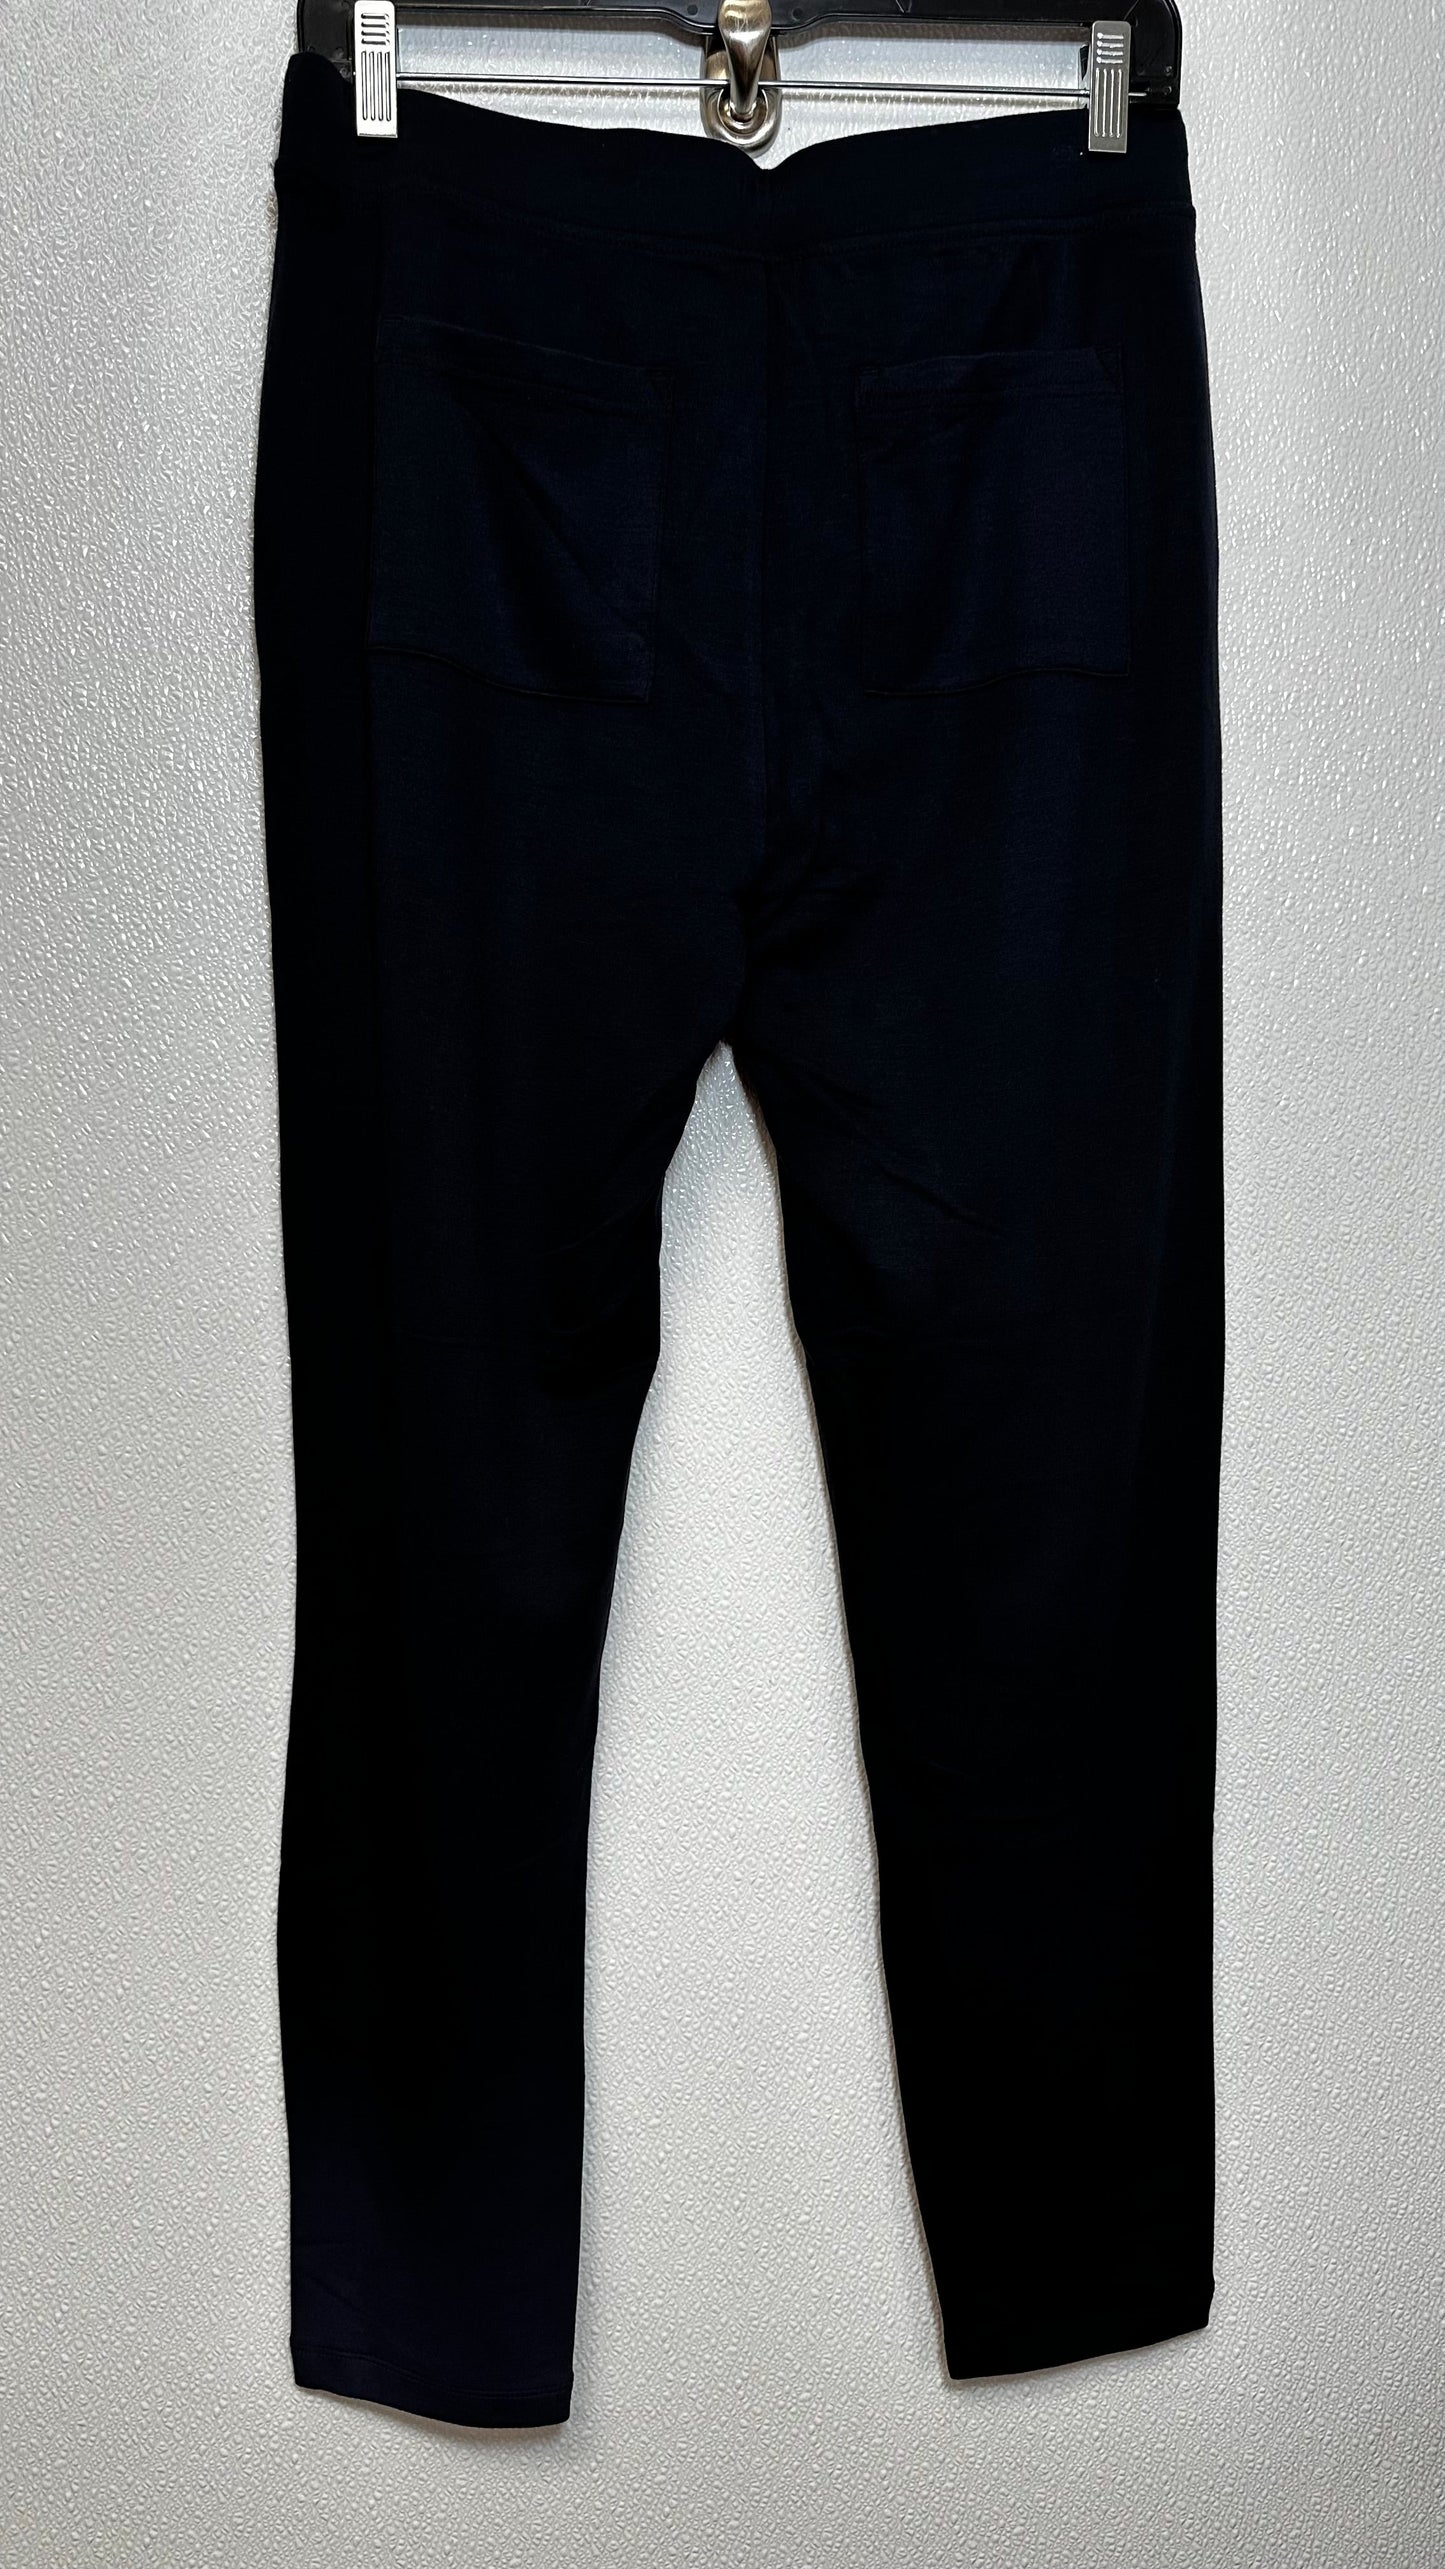 Navy Pants Lounge Lou And Grey, Size S